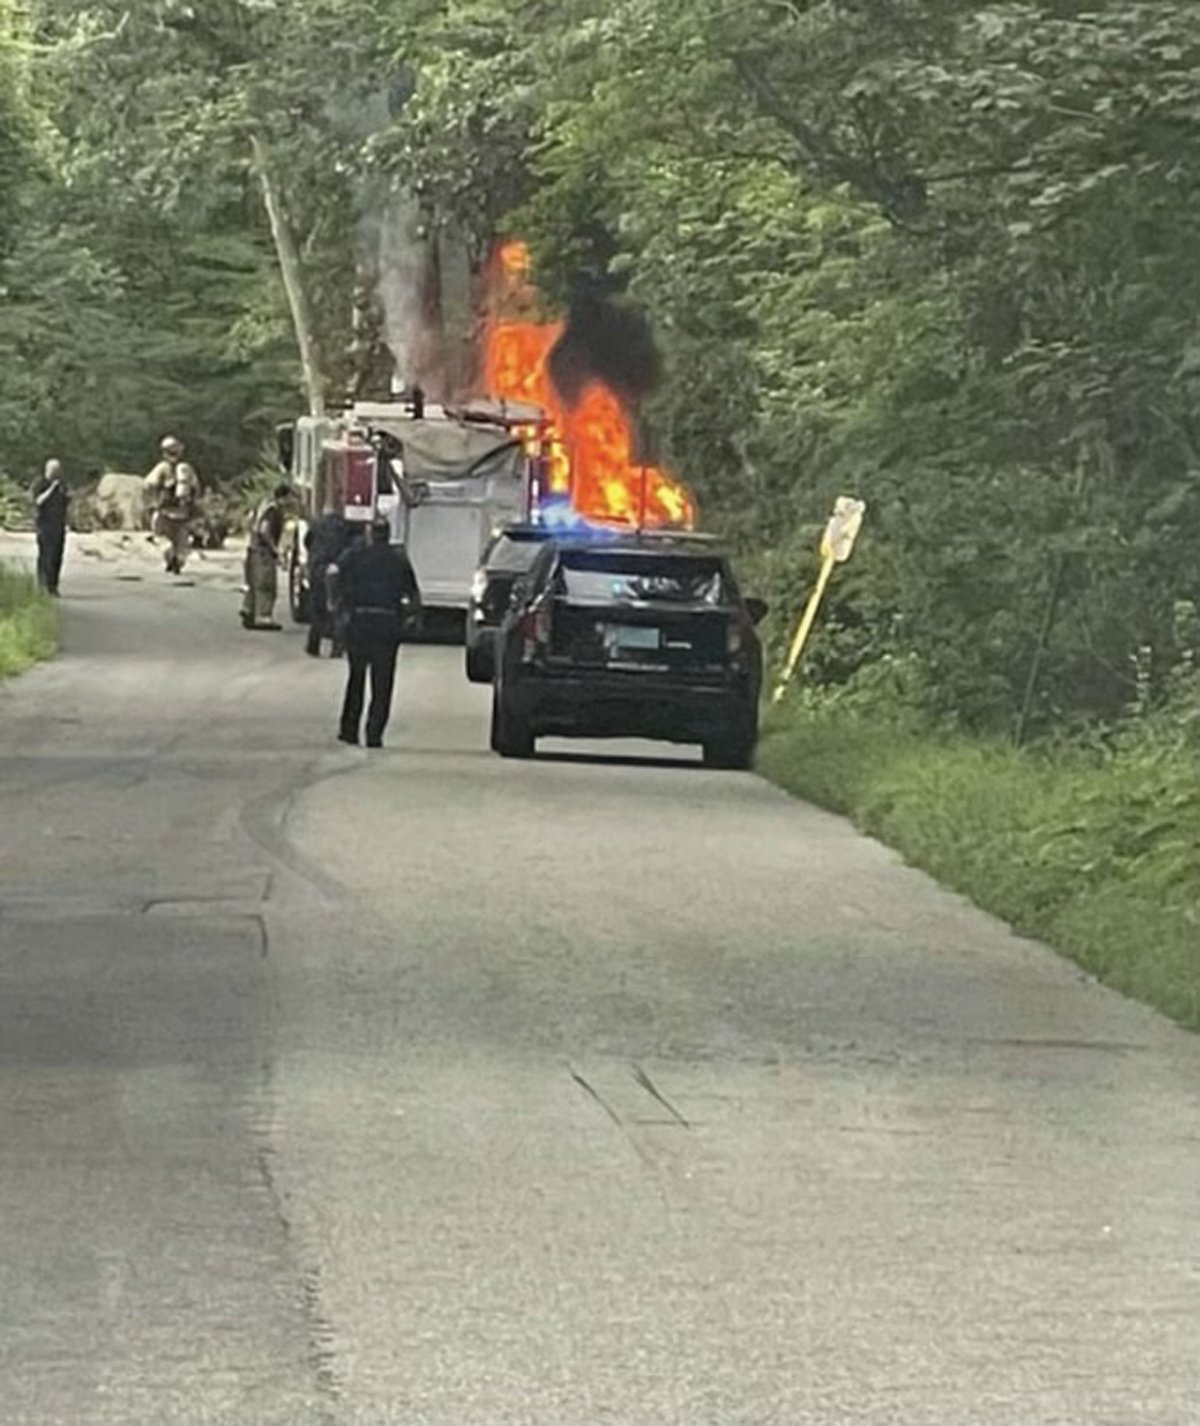 Cranston Police Chief Colonel Michael Winquist has announced that the department’s Traffic Unit is investigating a fatal crash that occurred Thursday, Aug. 12, 2021, on Laten Knight Road.